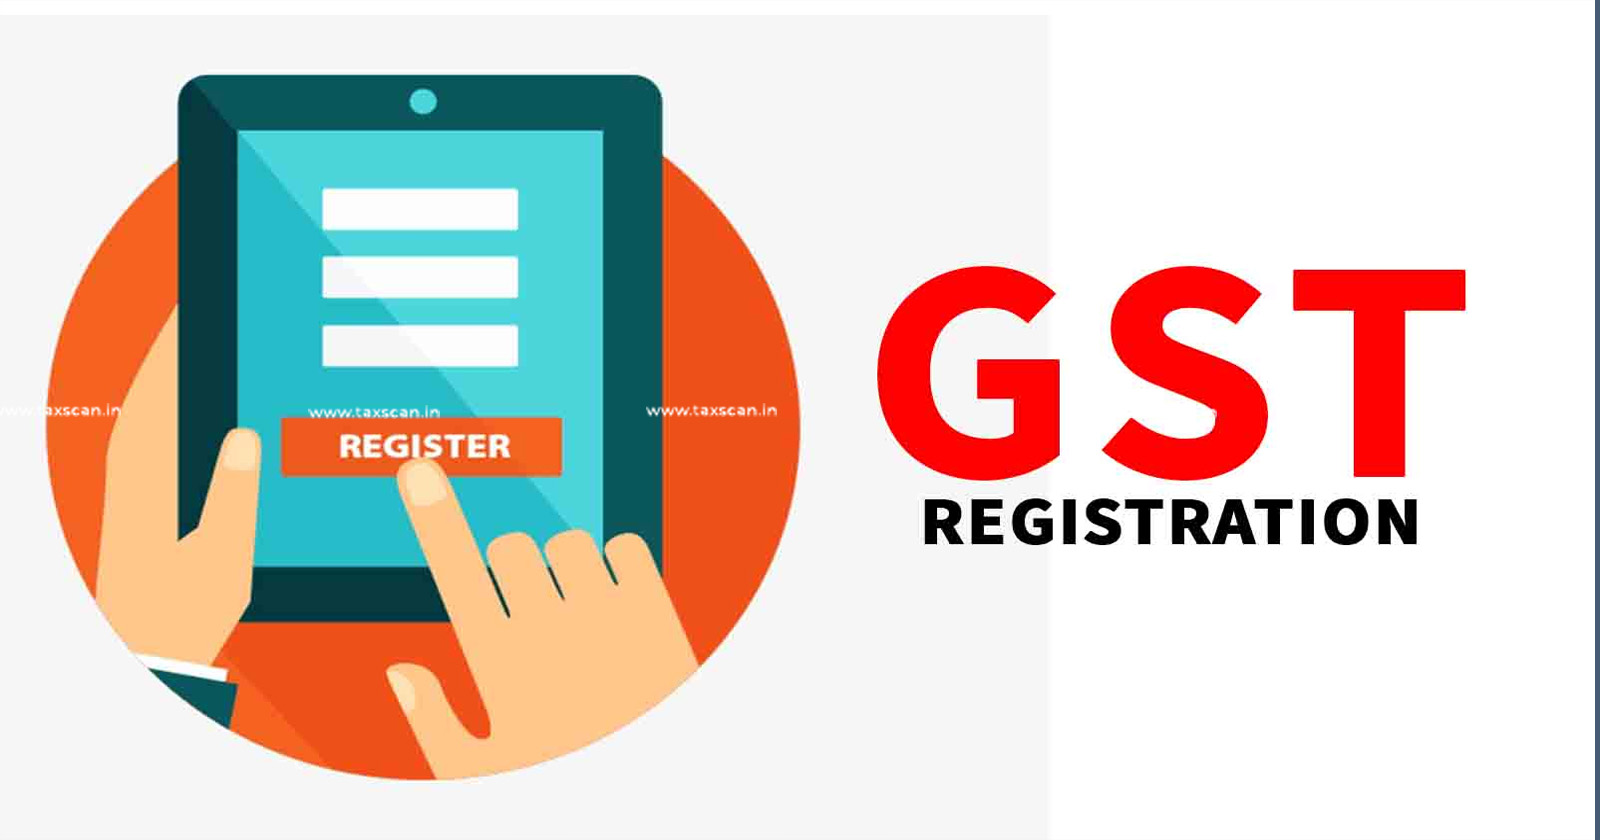 Central Govt exempts Suppliers of Goods - E-commerce Operators from - GST Registration Subject to Conditions - TAXSCAN